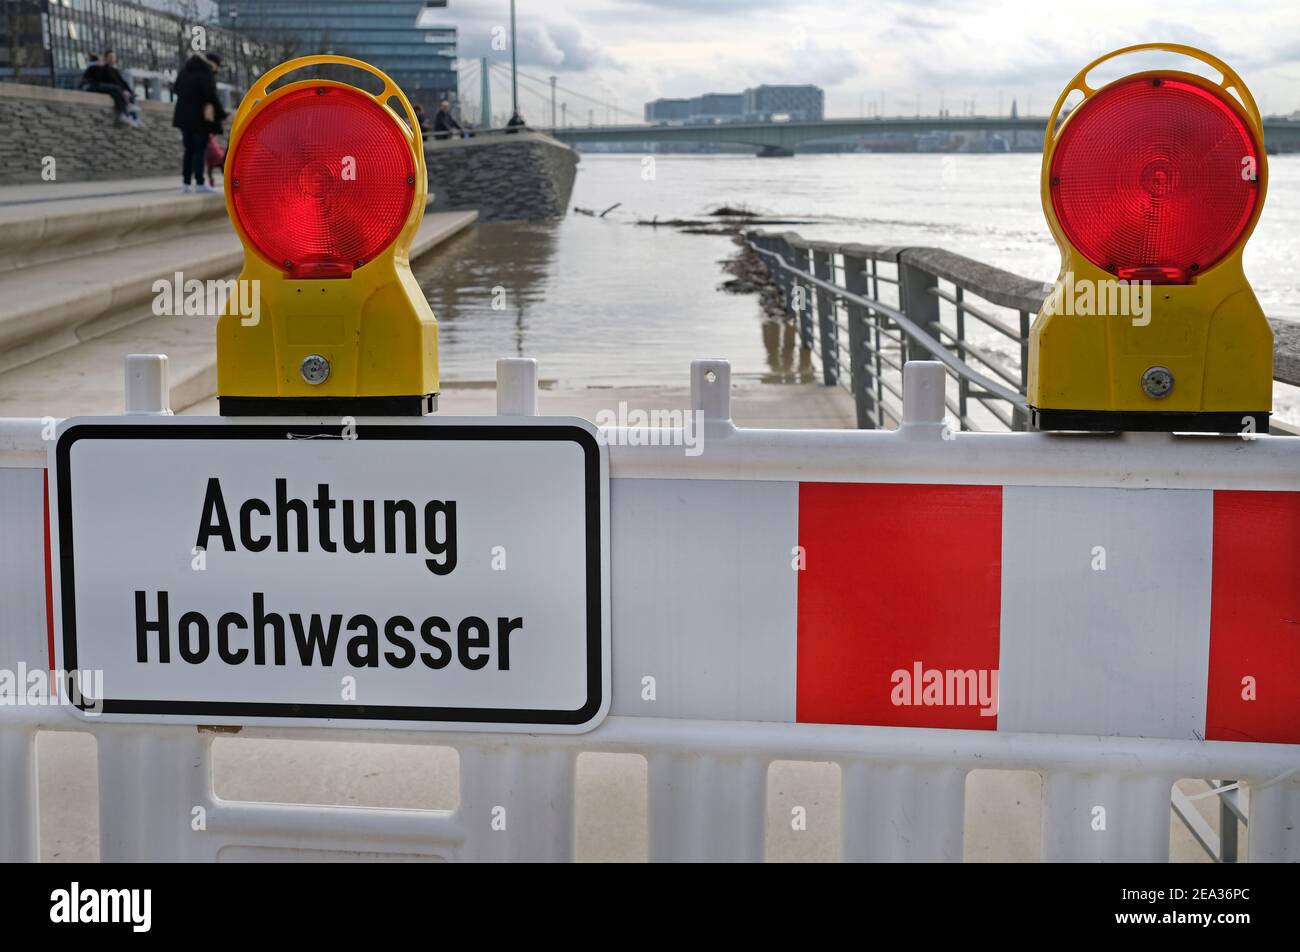 Extreme weather: Warning sign in German at the entrance to a flooded pedestrian zone in Cologne, Germany Stock Photo